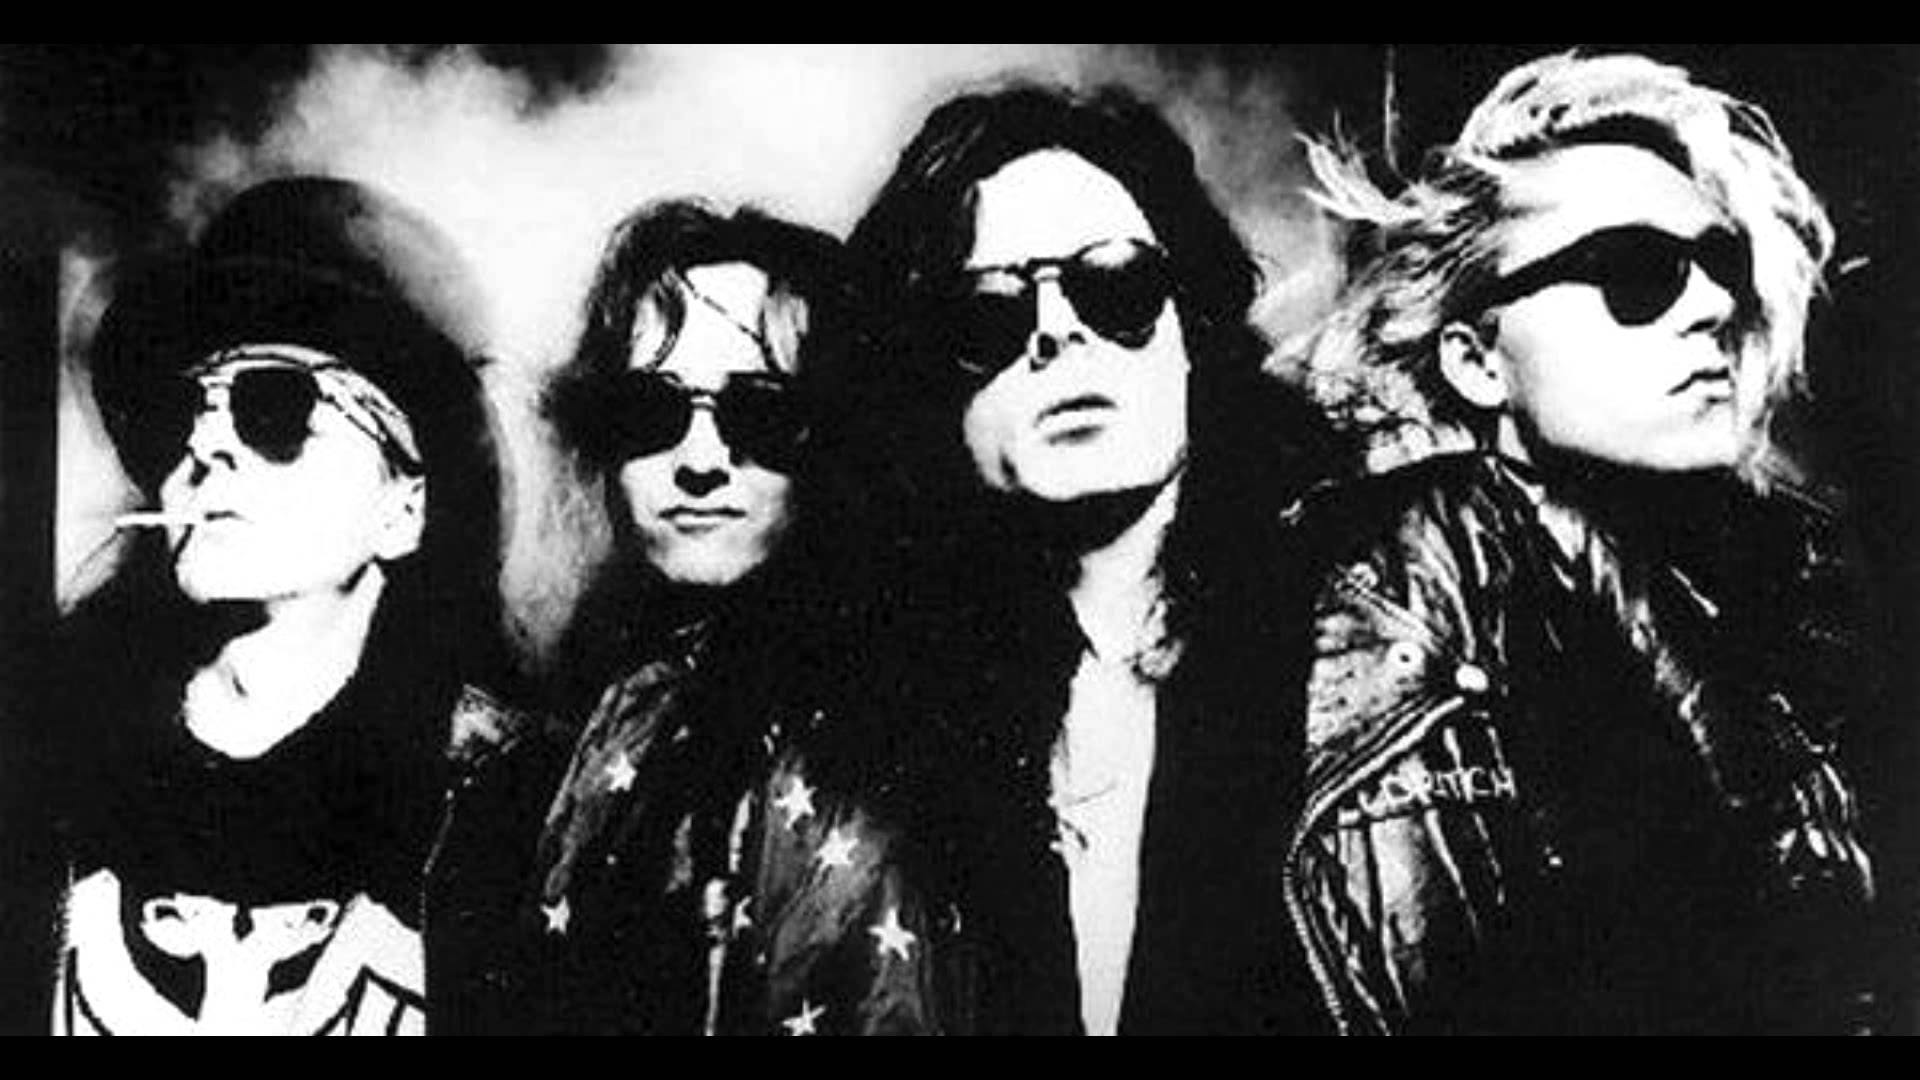 Best tunes of 1990: The Sisters Of Mercy “More”